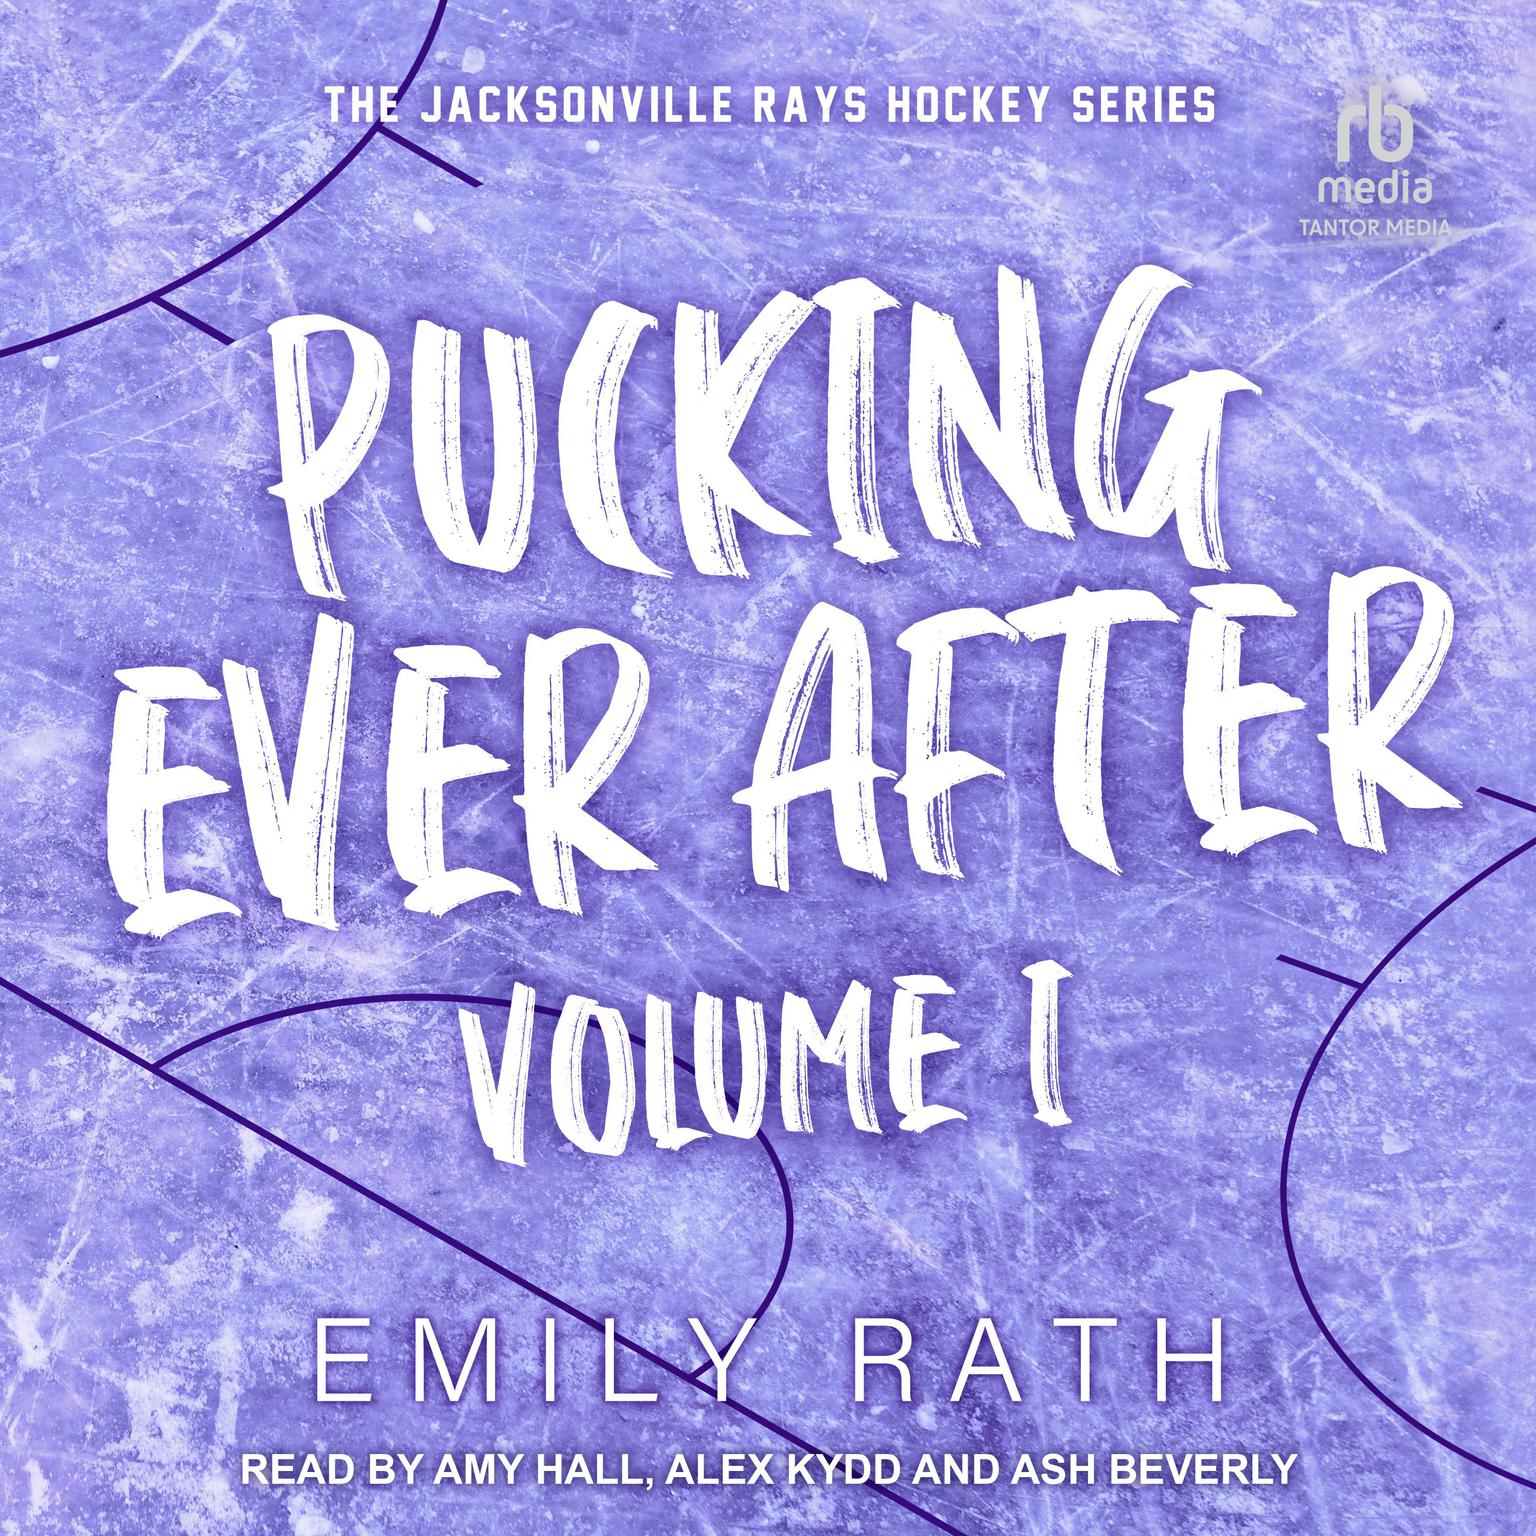 Pucking Ever After: Volume 1 Audiobook, by Emily Rath